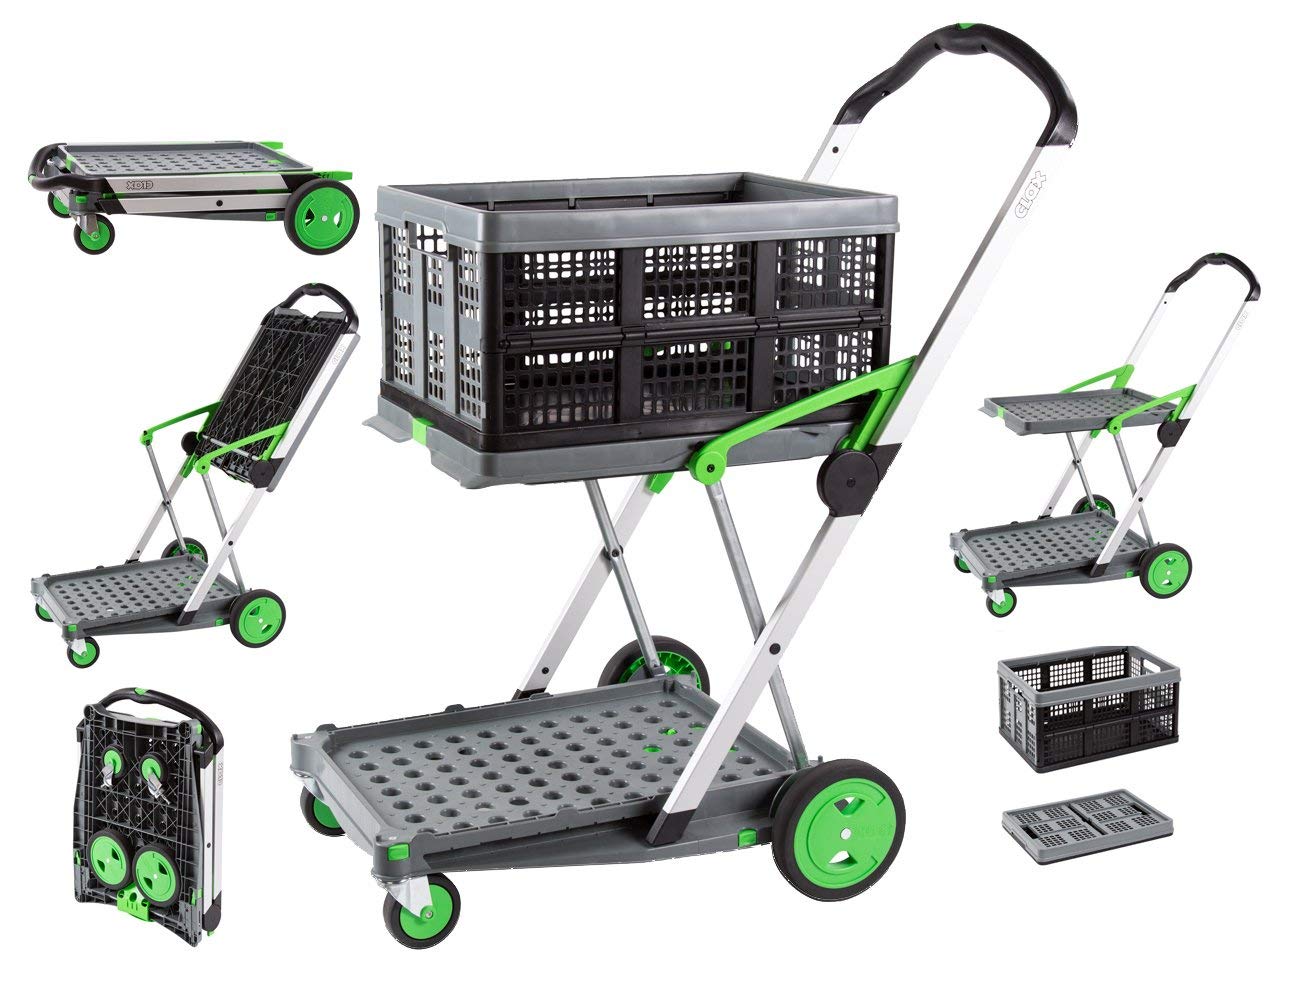 CLAX® The Original | Made in Germany | Multi use Functional Collapsible carts | Mobile Folding Trolley | Shopping cart with Storage Crate | Platform Truck (Green)